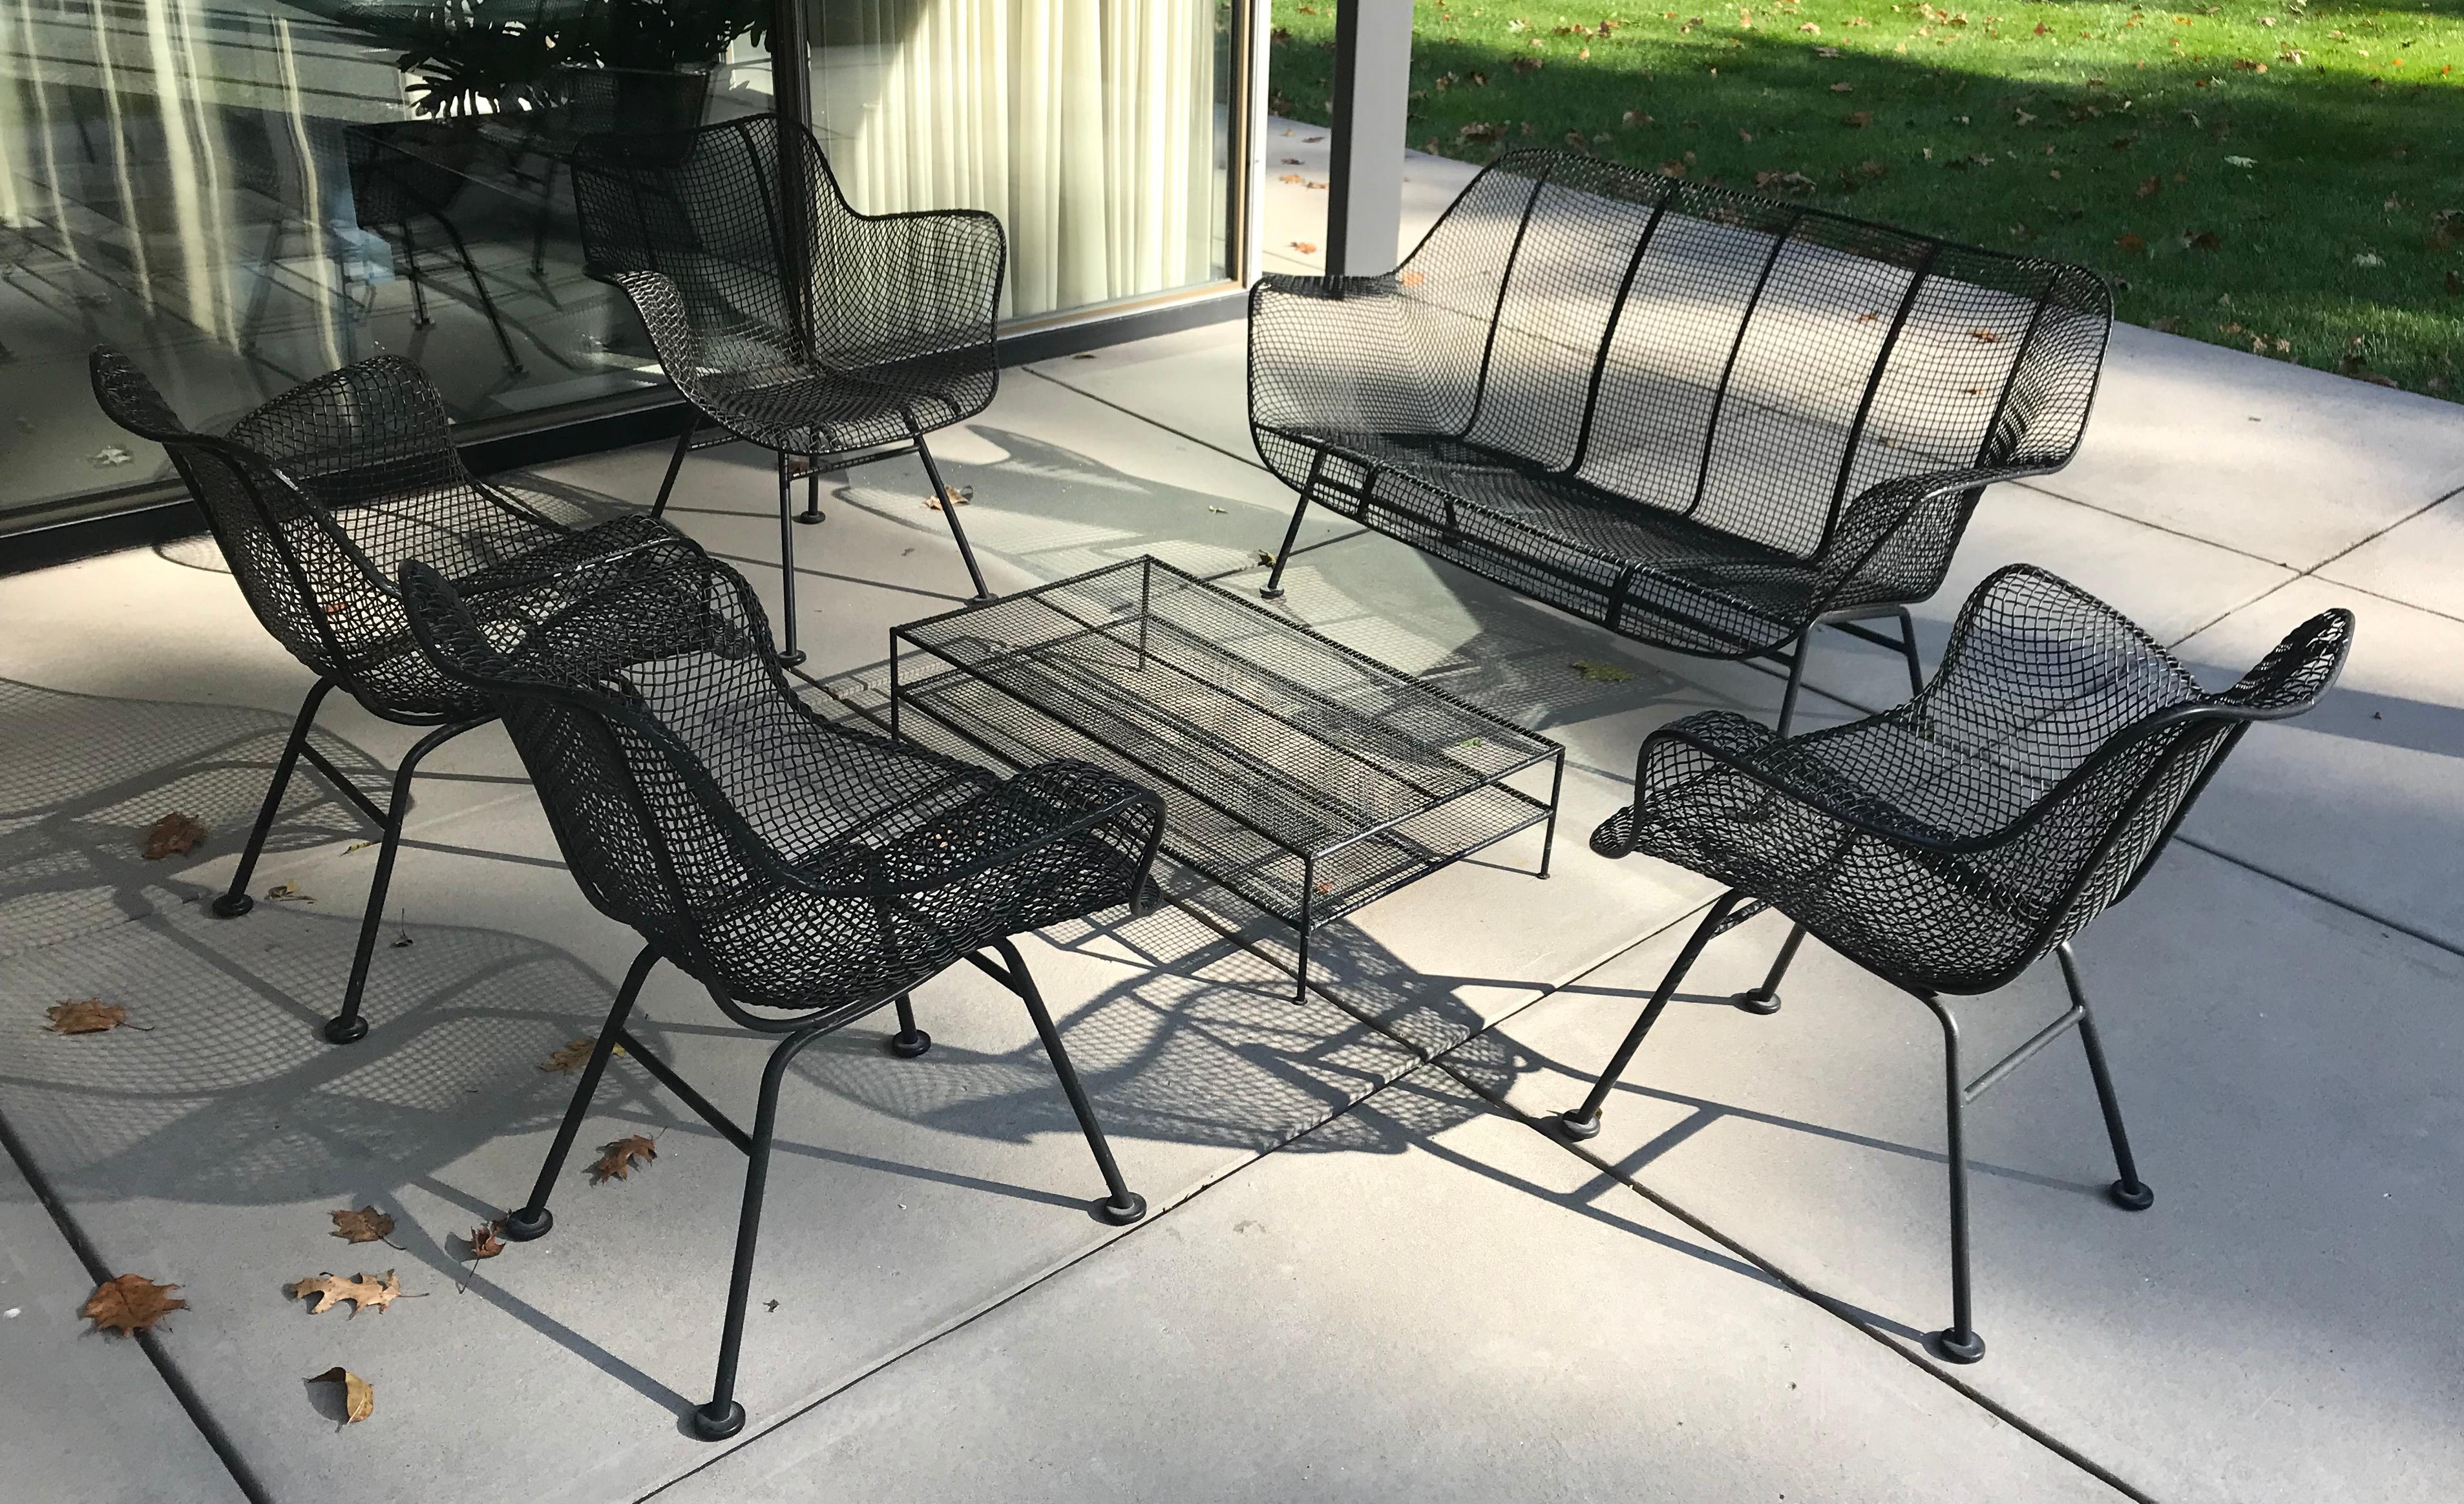 Great set of Russell Woodard Sculptura series patio furniture, 1950s. Consists of settee with four armrest lounge chairs. Light gray Sunbrella cushions and pillows included. Two low height coffee tables also included, they are not Russell Woodard